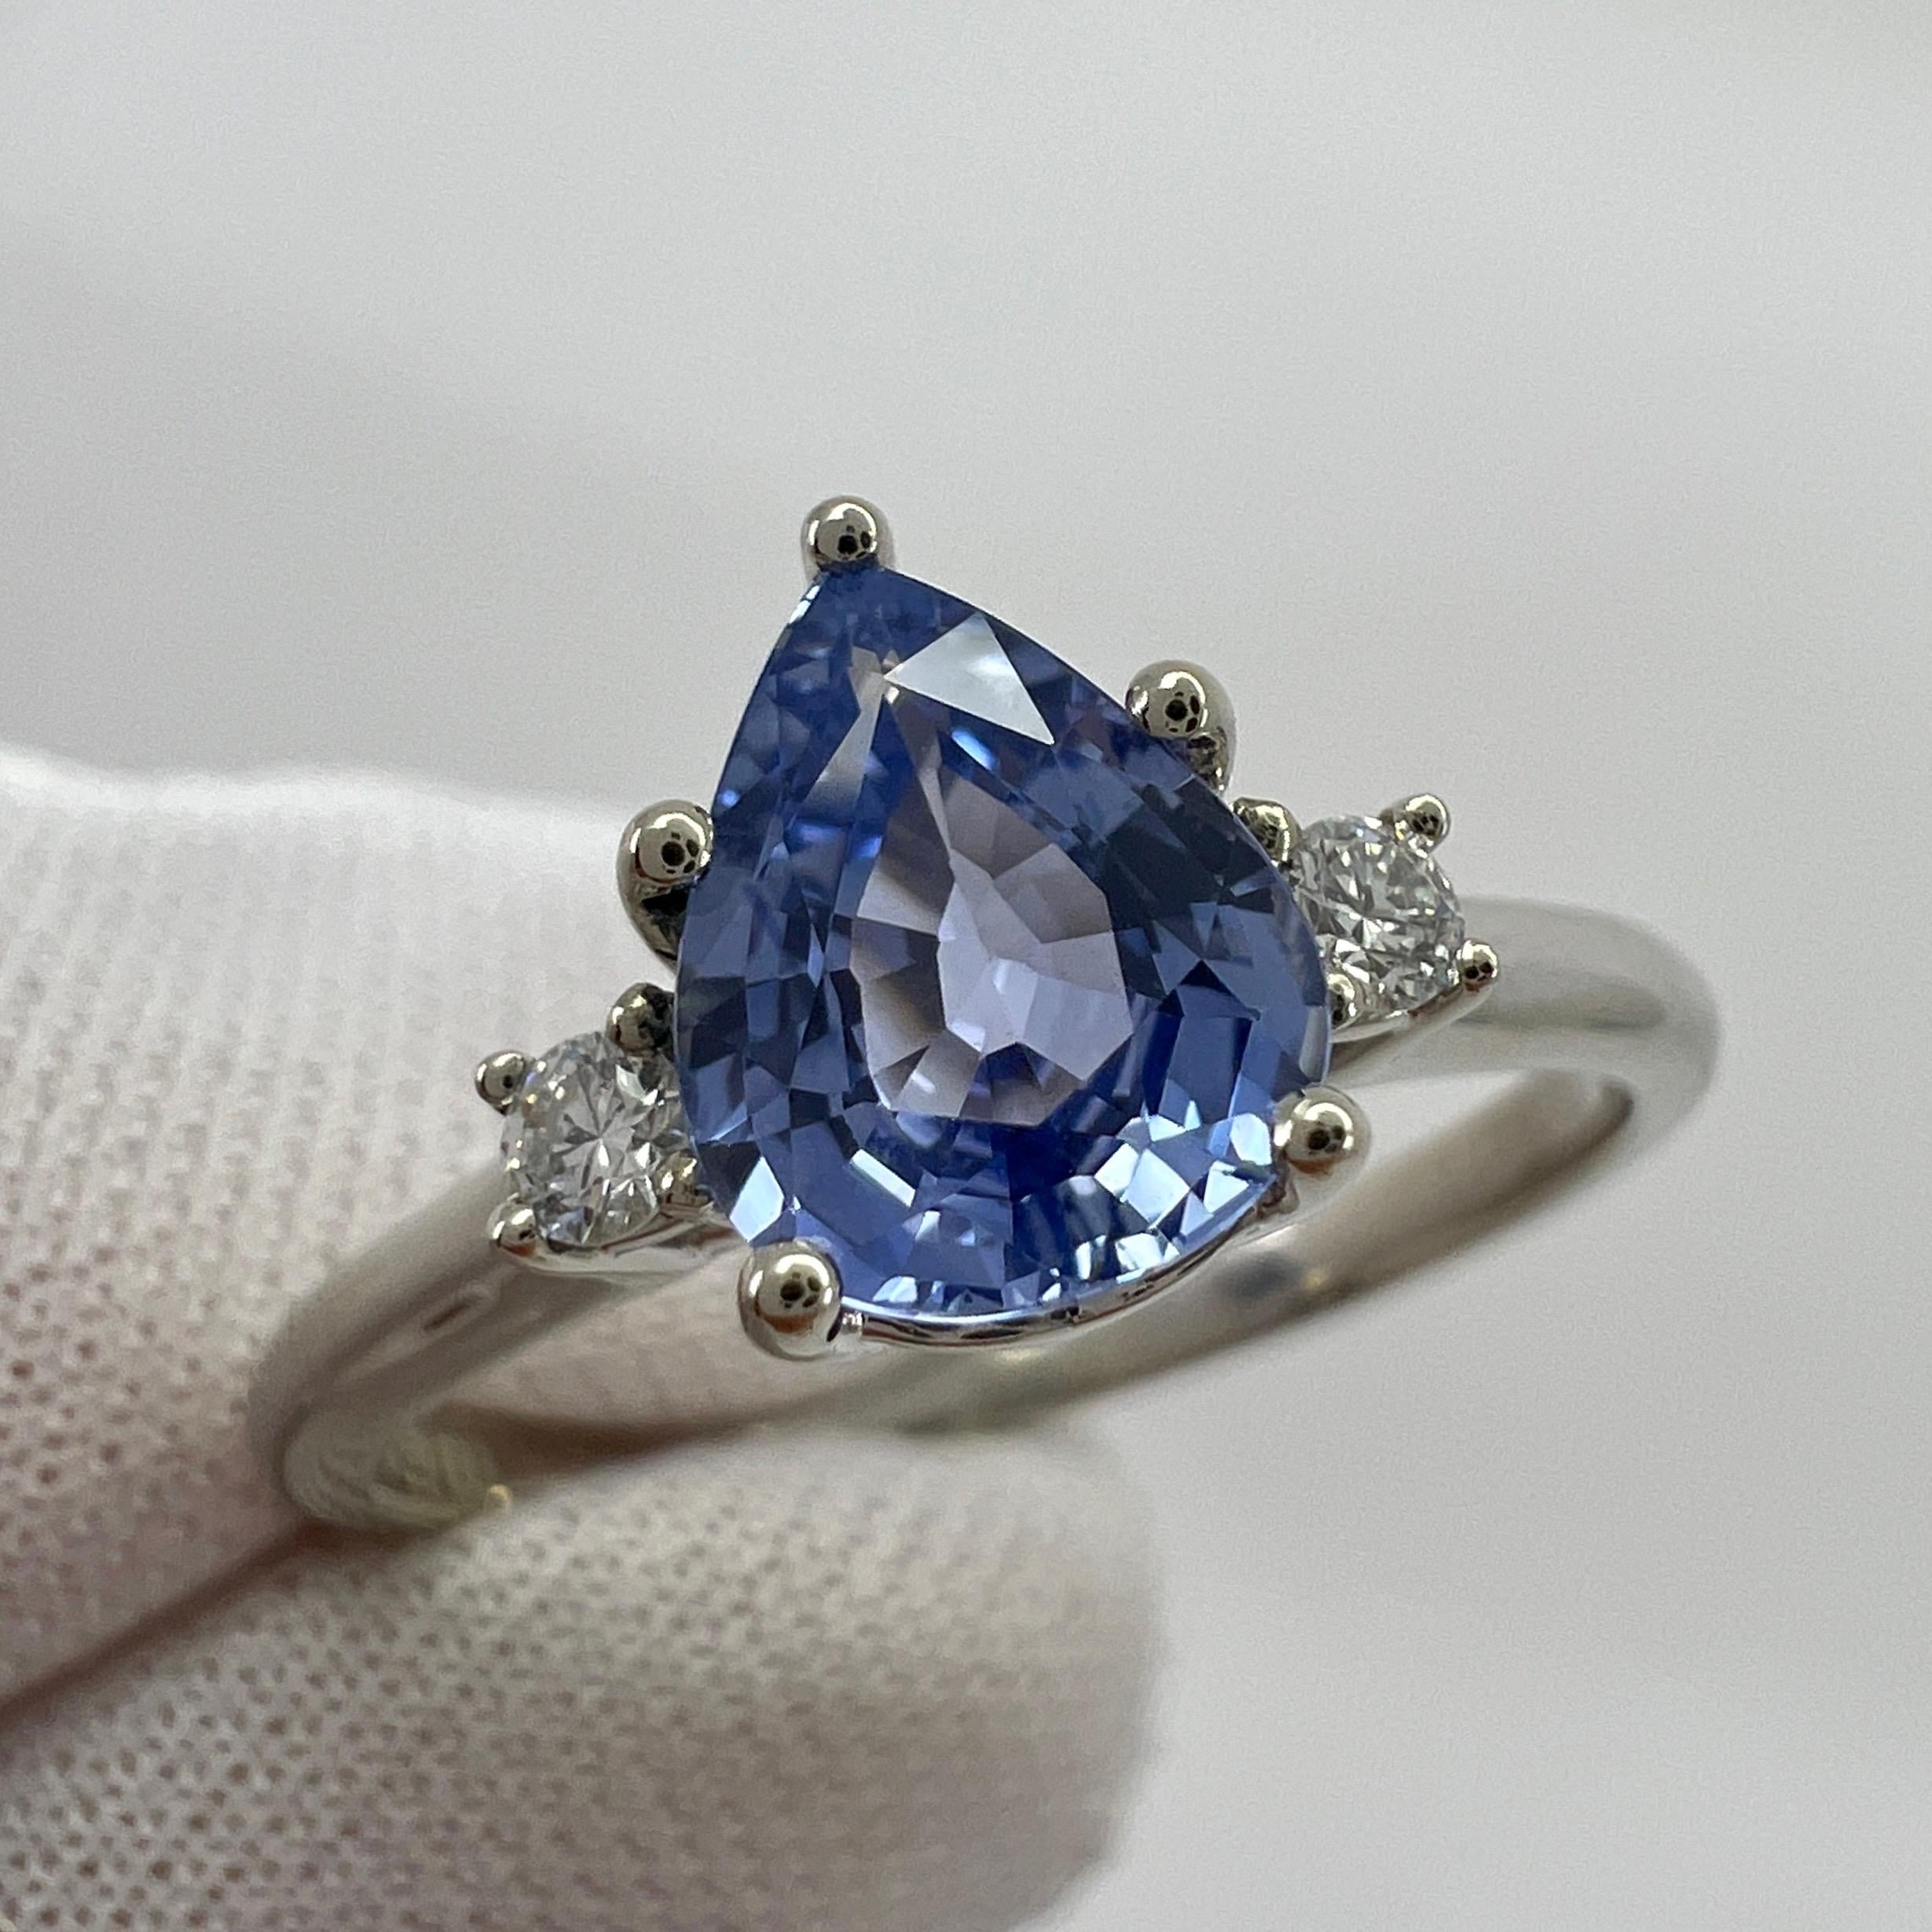 Fine Pear Cut Ceylon Blue Sapphire & Diamond 18k White Gold Three Stone Ring.

Fine 1.15 carat Ceylon sapphire with a beautiful vivid light blue colour. This stone also has an excellent pear teardrop cut and excellent clarity. VVS.
The sapphire